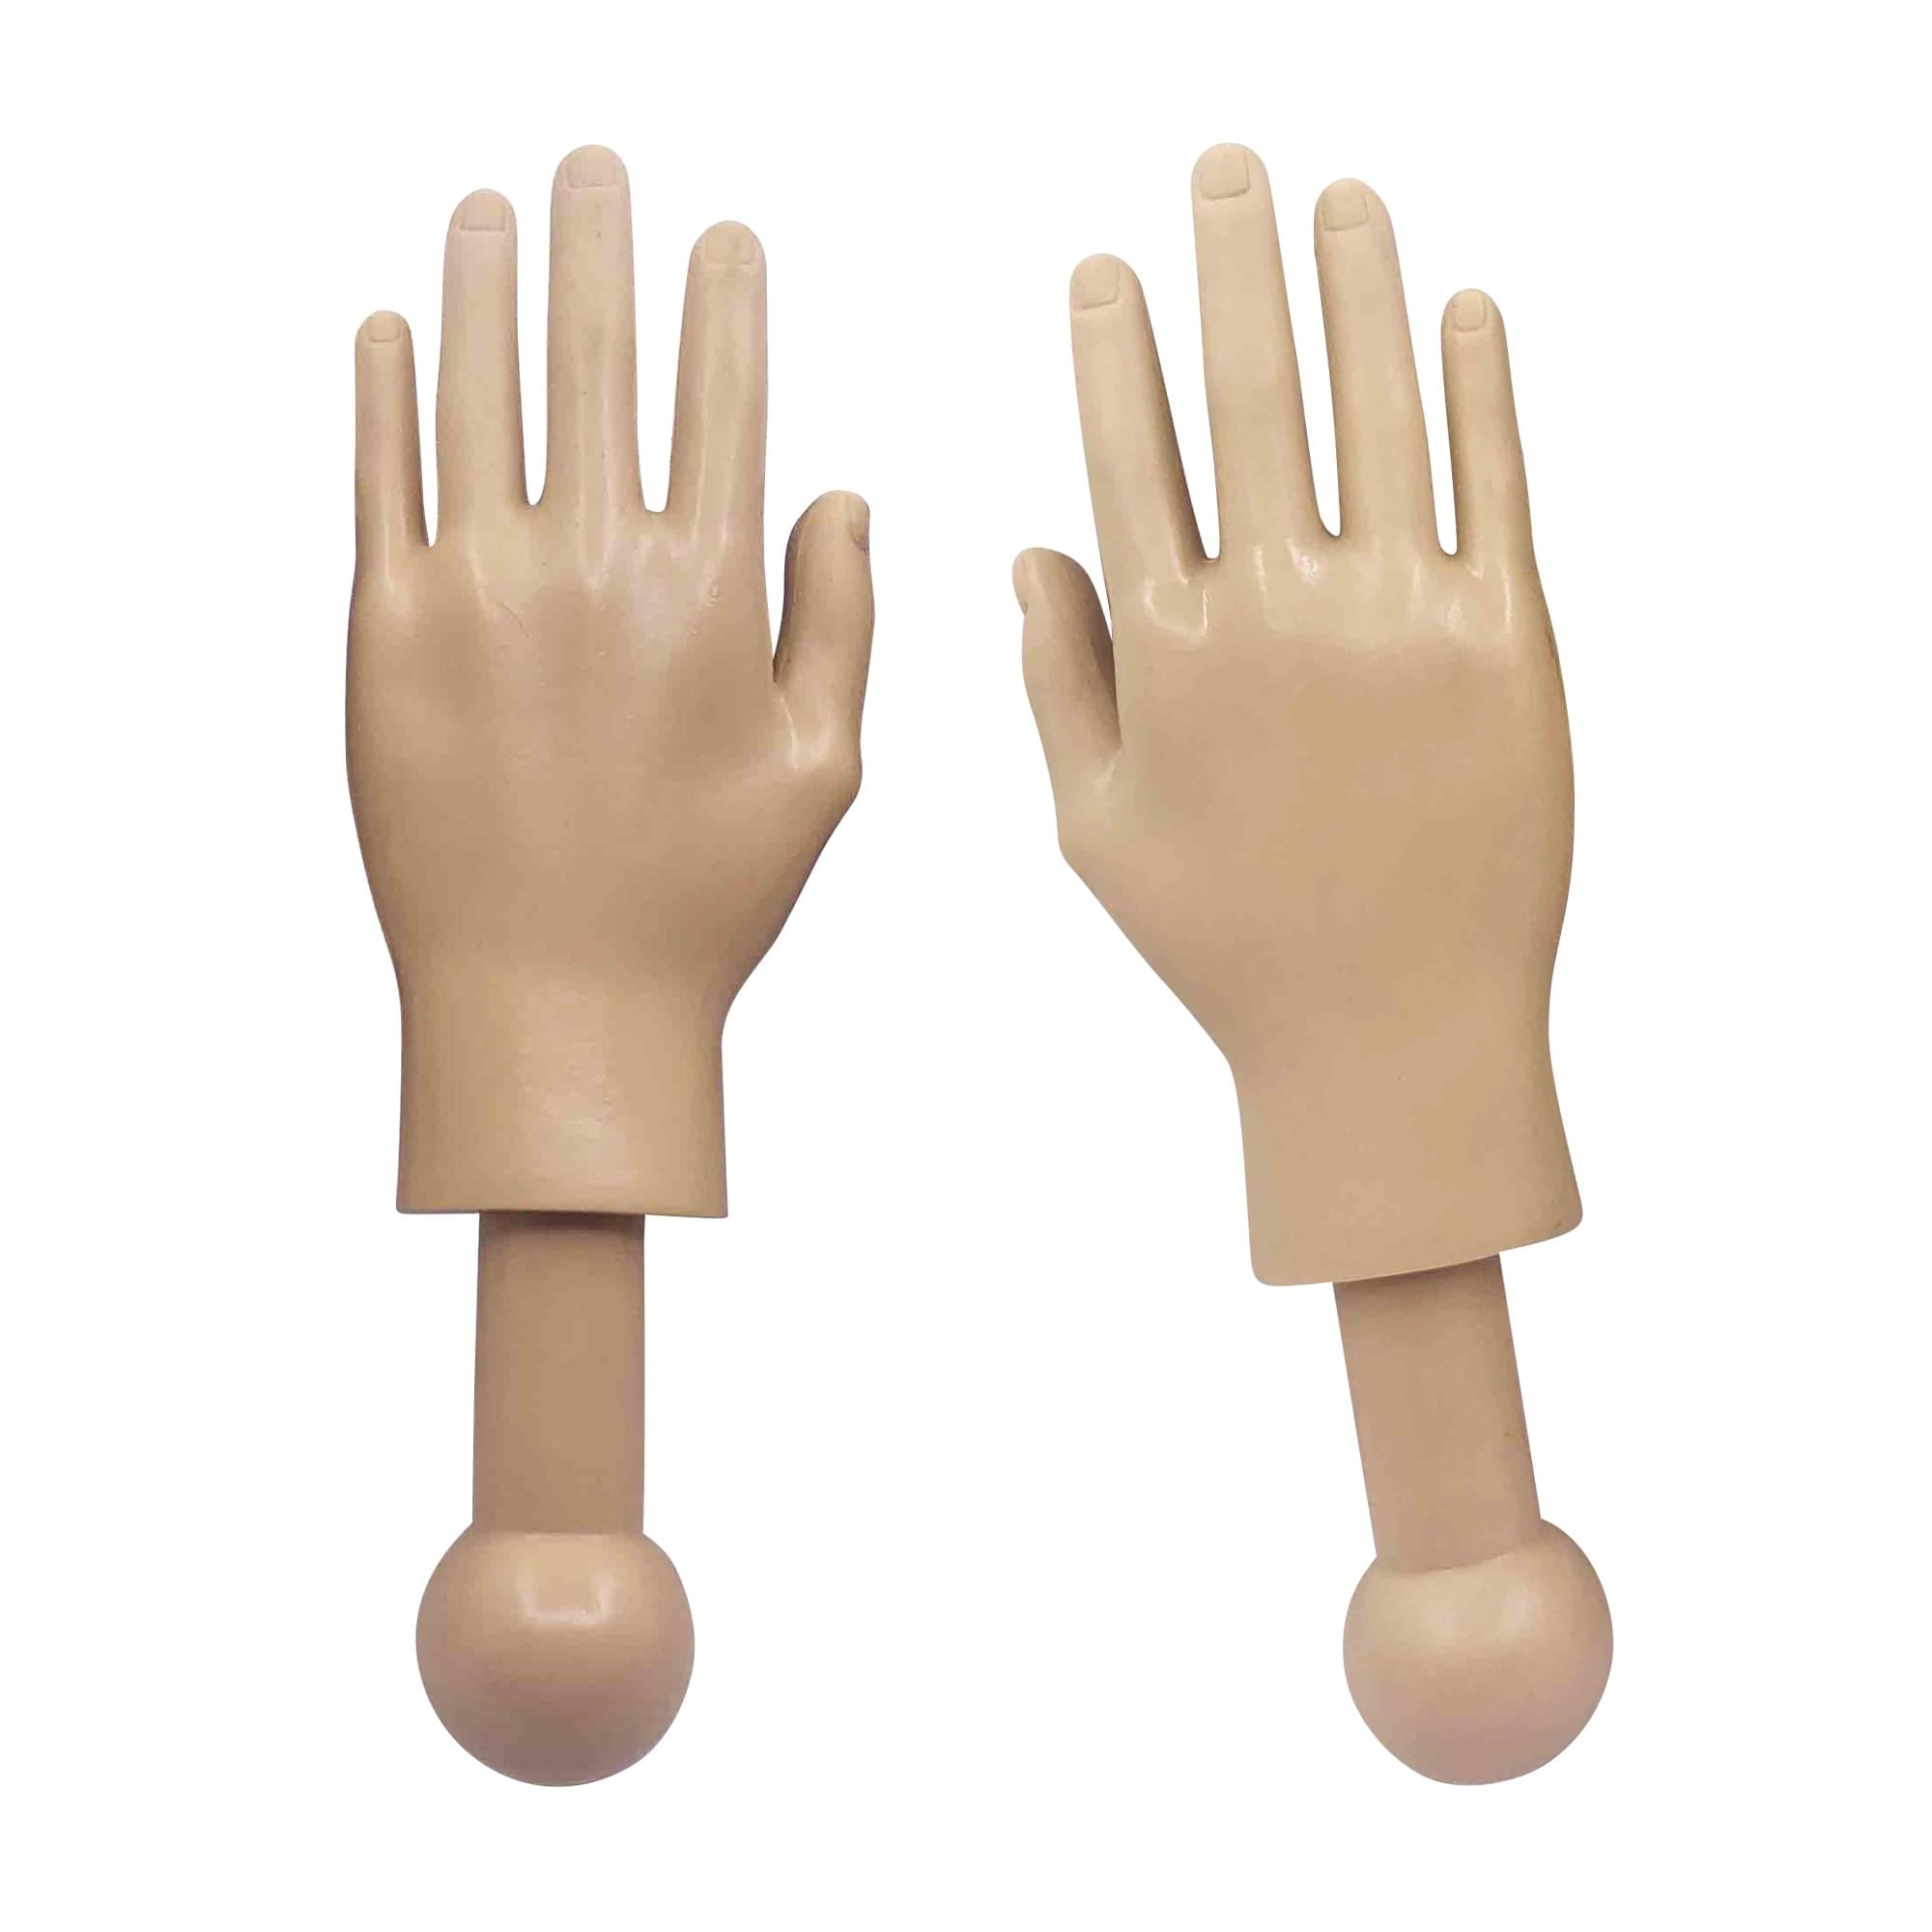 Tiny Hands 4.5-Inch Novelty Toy | Left and Right + Middle Finger Hand Deep  Brown